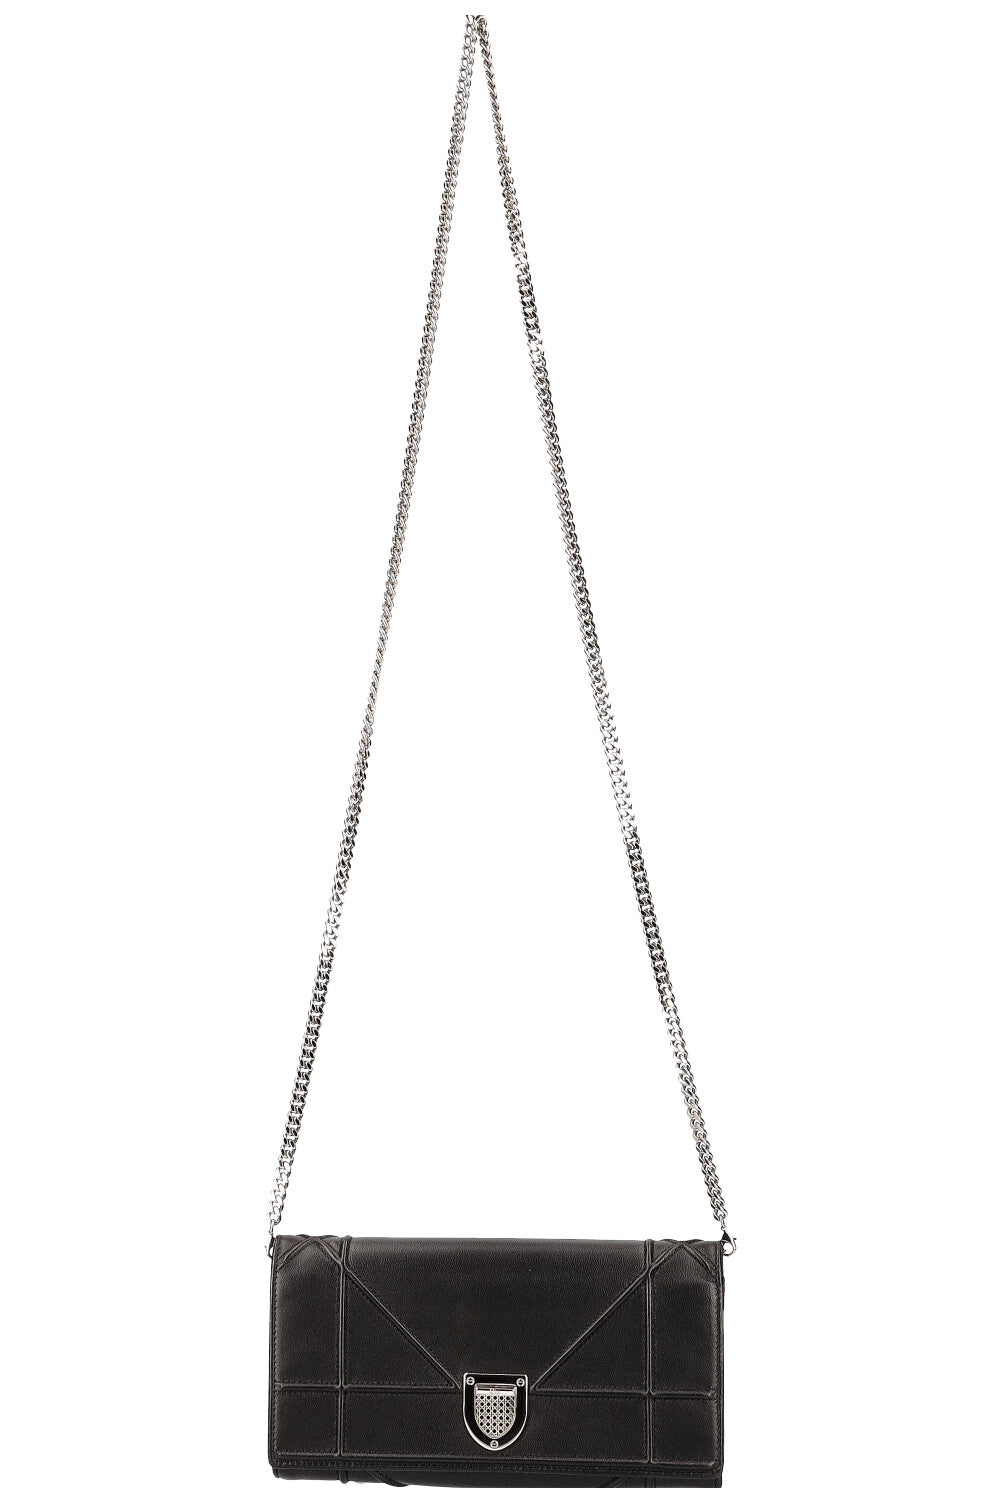 Christian Dior Wallet on Chain Black 2015